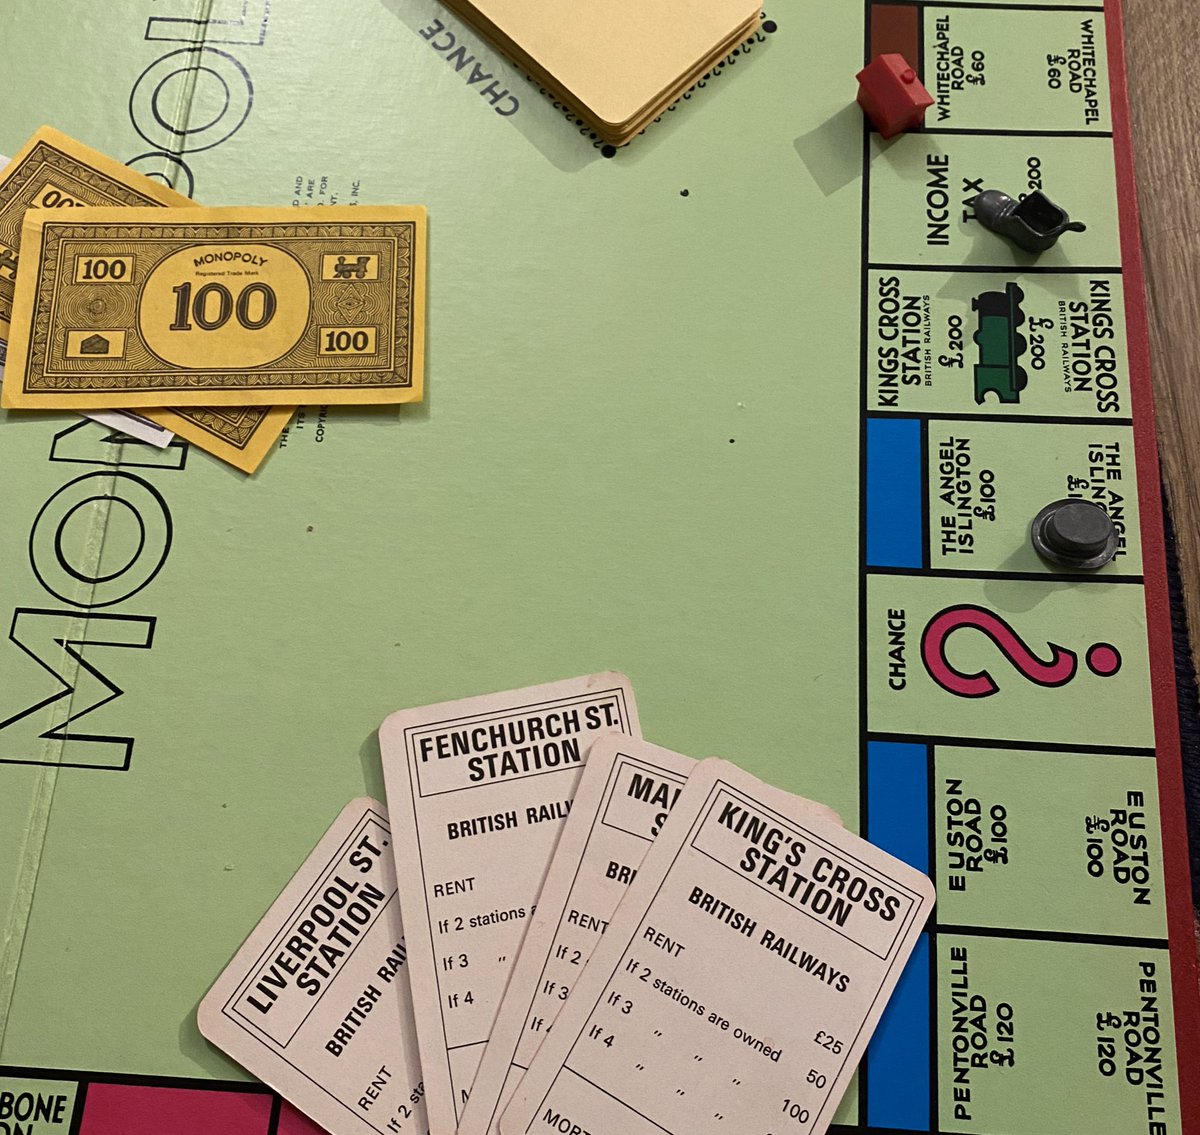 All 4 #Monopoly stations and specialist register this evening after 2 months of acting up. Result! Years of blood, sweat and tears (some my own) and more than my character limit of colleagues & mentors to thank for lightening the load. To the end of the beginning 😊